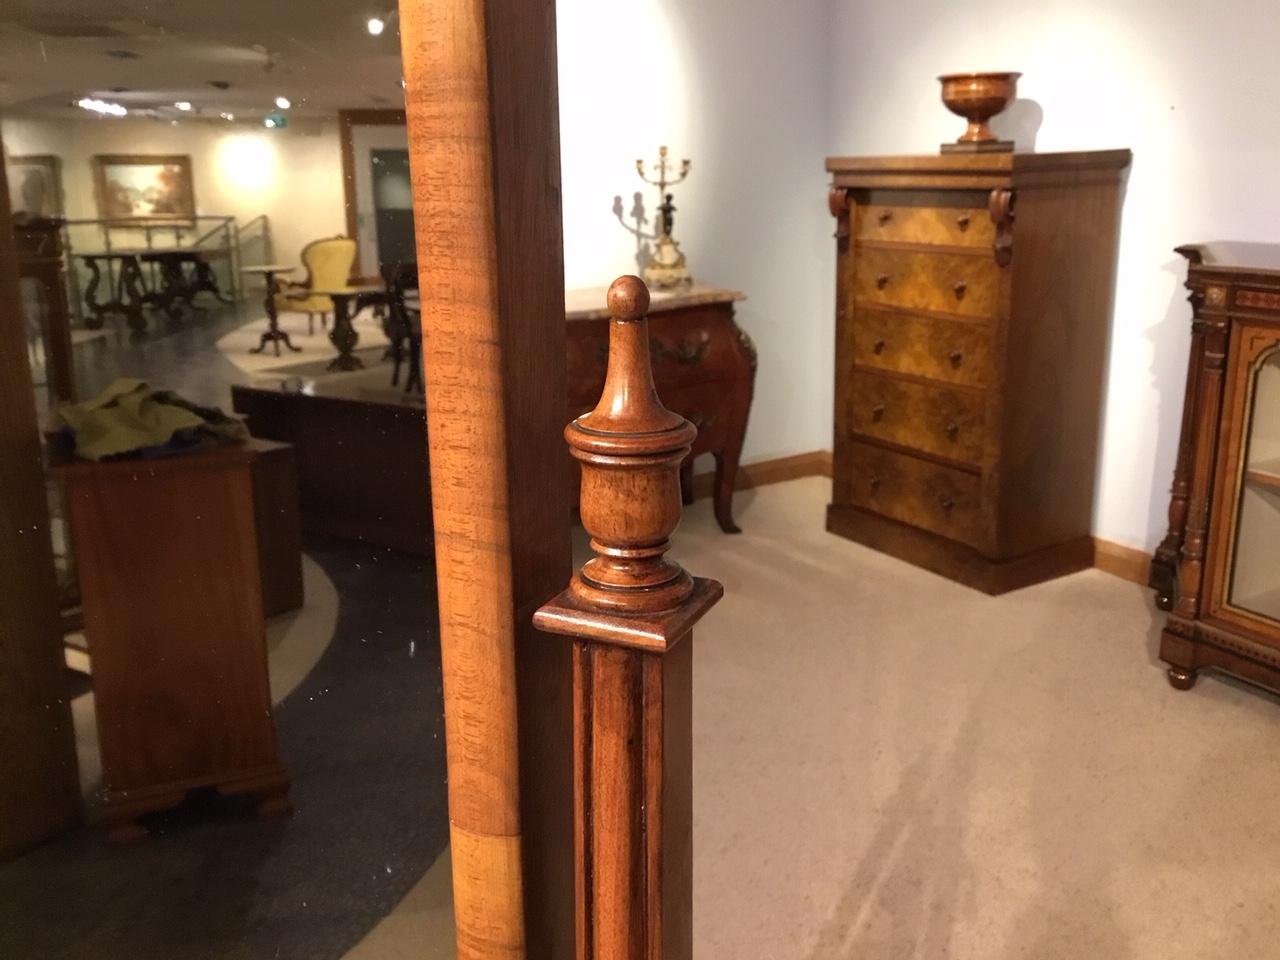 A walnut Queen Anne style antique cheval mirror. Having a rectangular mirror housed in a block moulded walnut shaped frame with recessed walnut upright supports, turned finials and brass handles which adjust the tilt of the mirror. The whole